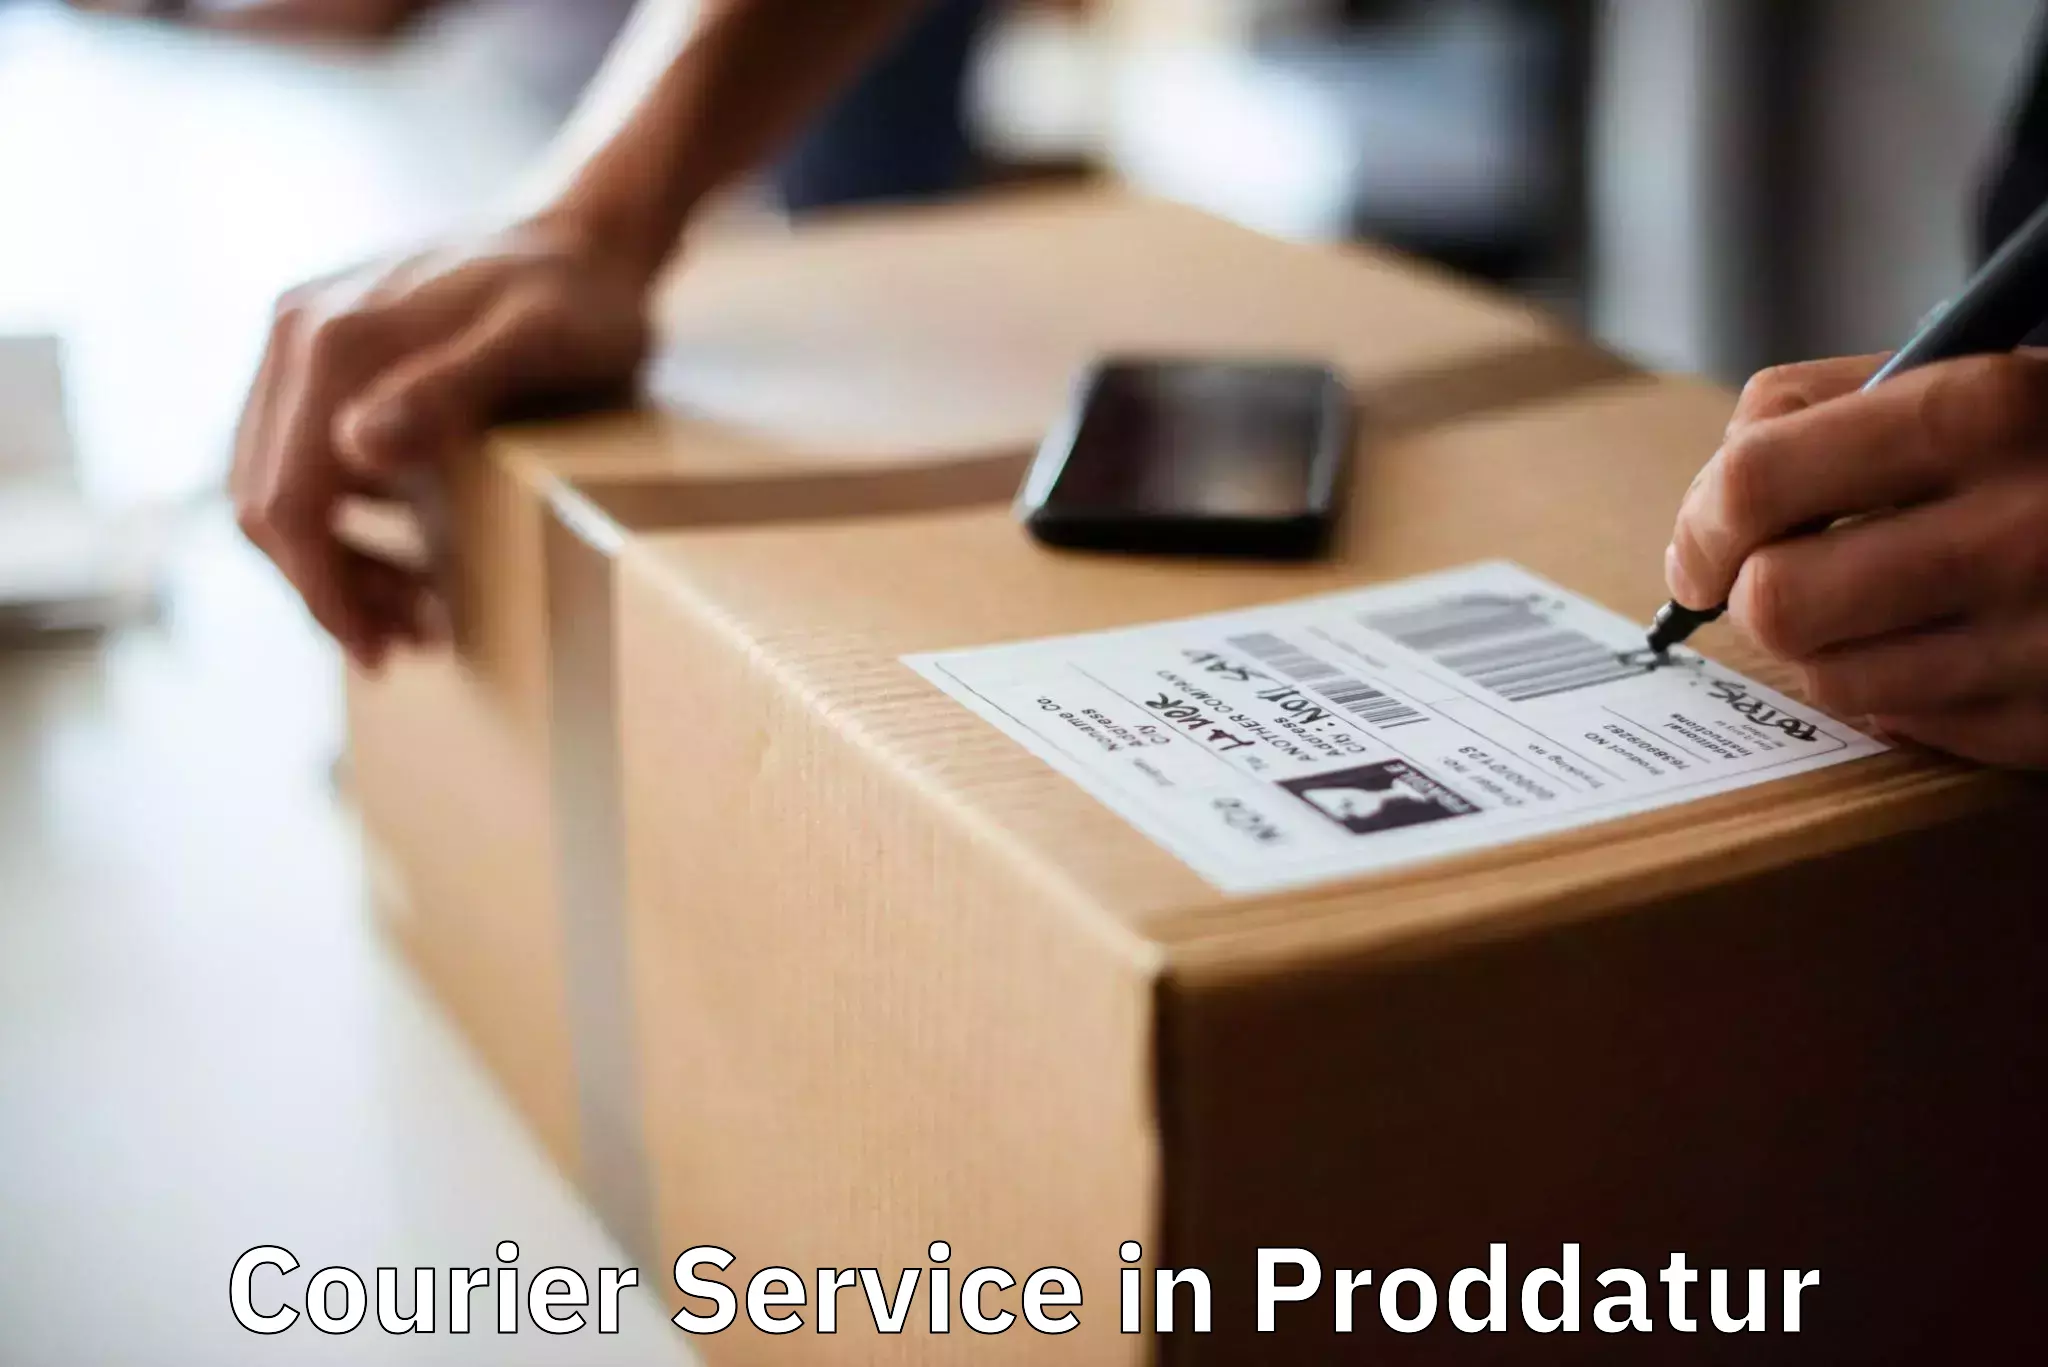 On-demand delivery in Proddatur